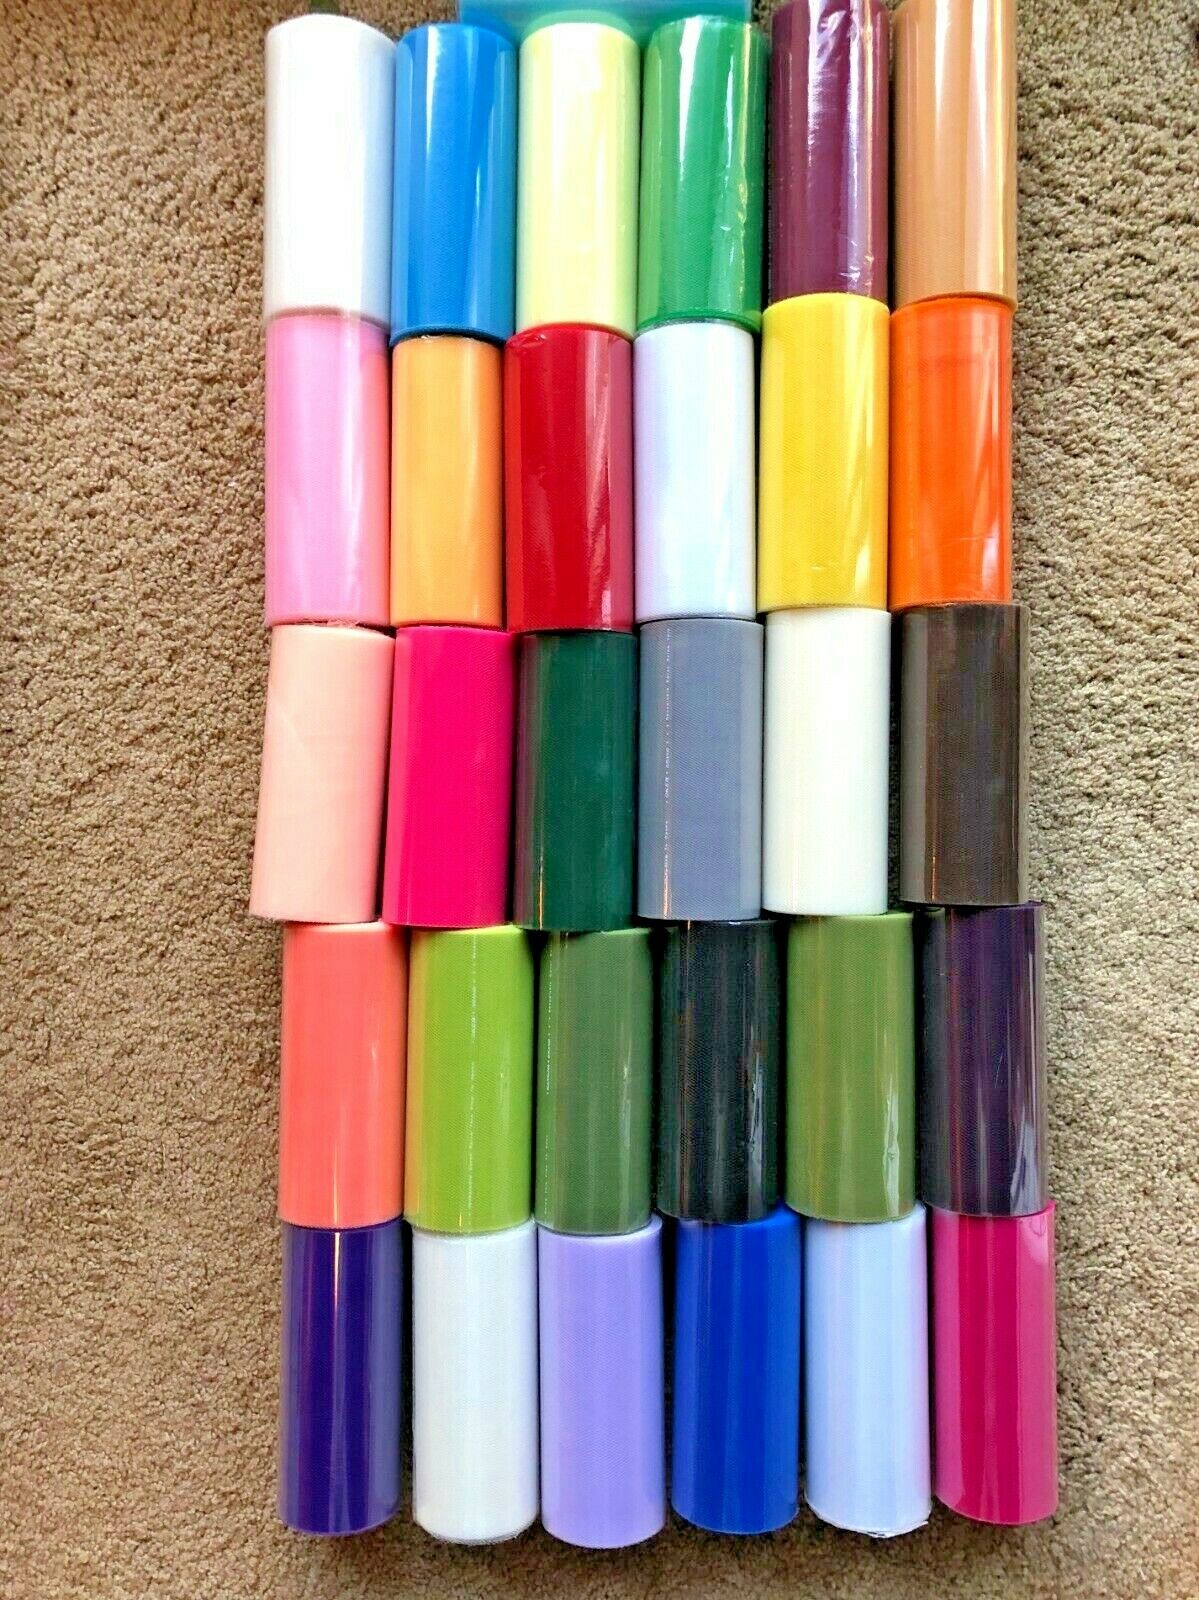 Brand New Tulle Roll 6"x25yards Over 20 Colors $1.50 If Buy 4+